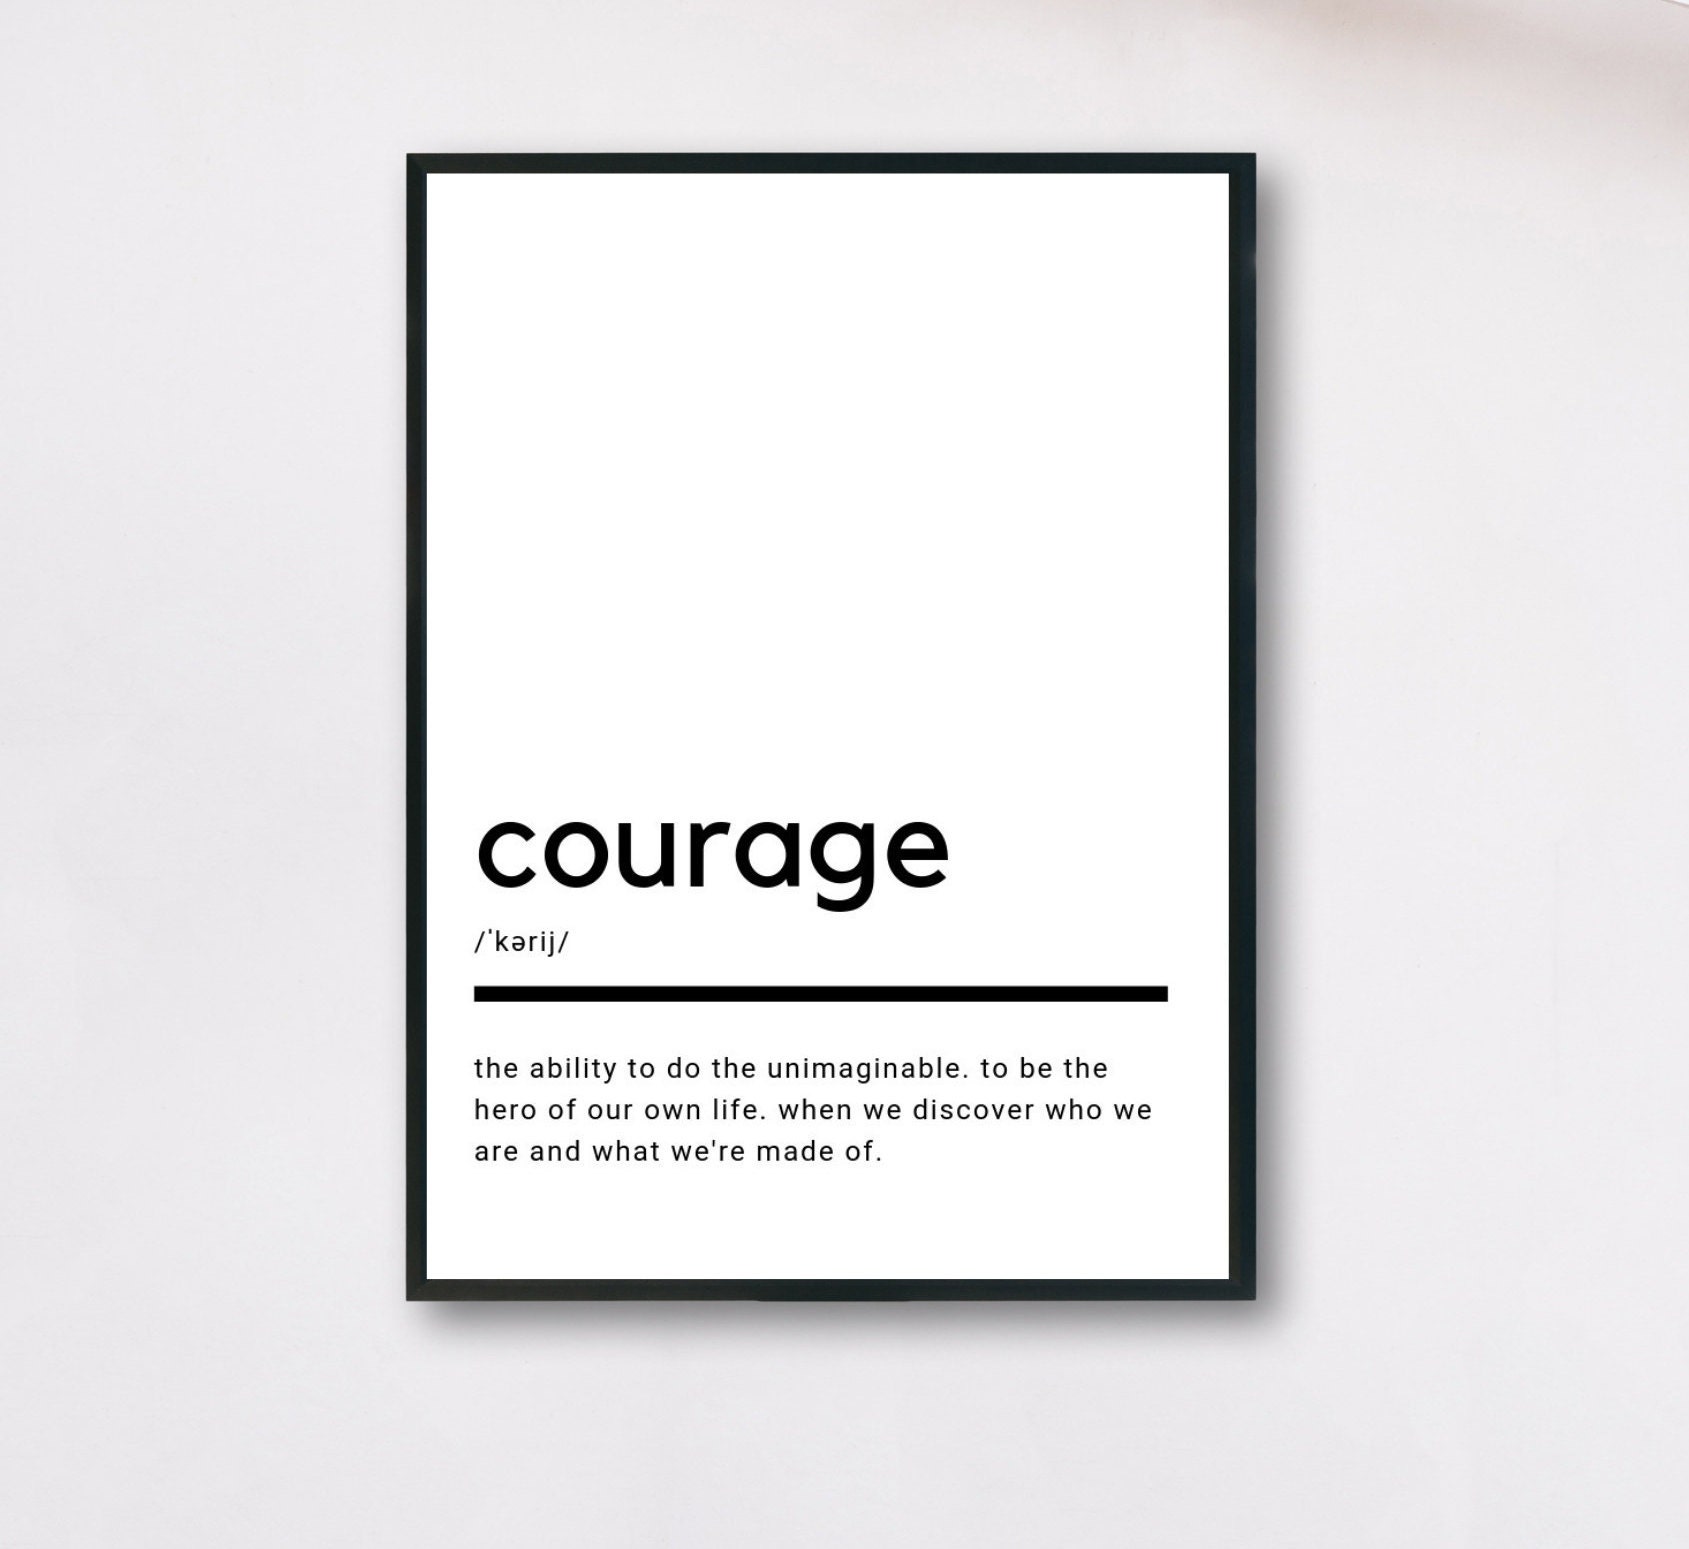 Courage Definition, Printable Wall Art, Courage Poster, Courage Quote,  Courage Printable, Courage Gift, Courage Wall Art, Wall Decor -  Canada